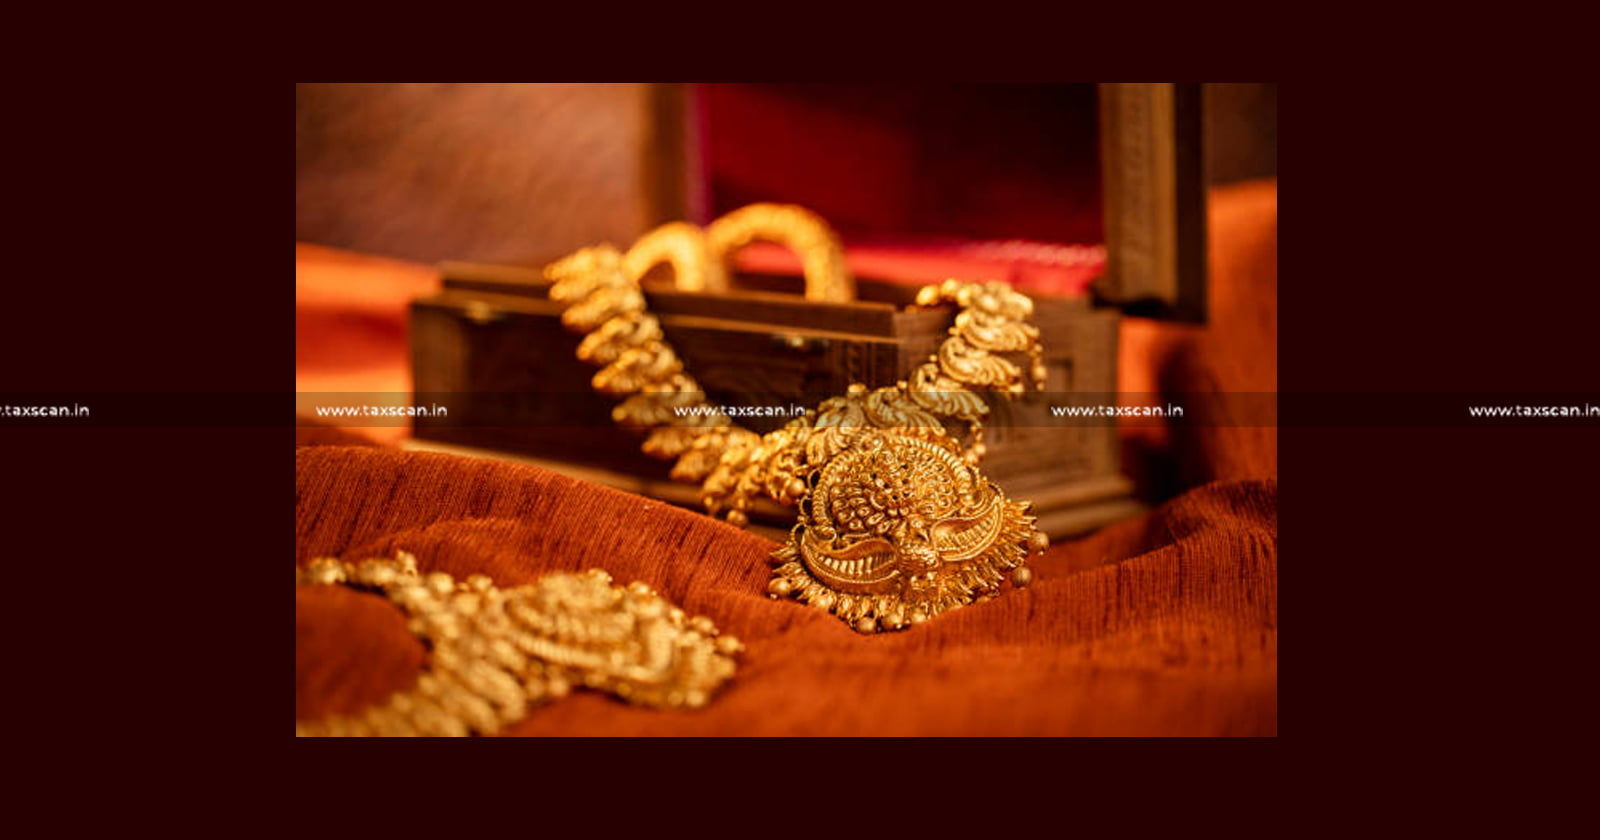 Gold Jewellery - Excess Gold Jewellery Stock - Gold Jewellery Stock - Survey Proceedings - Stock transferred - Proprietary Concern - Partnership Firm - unexplained investment - ITAT - taxscan